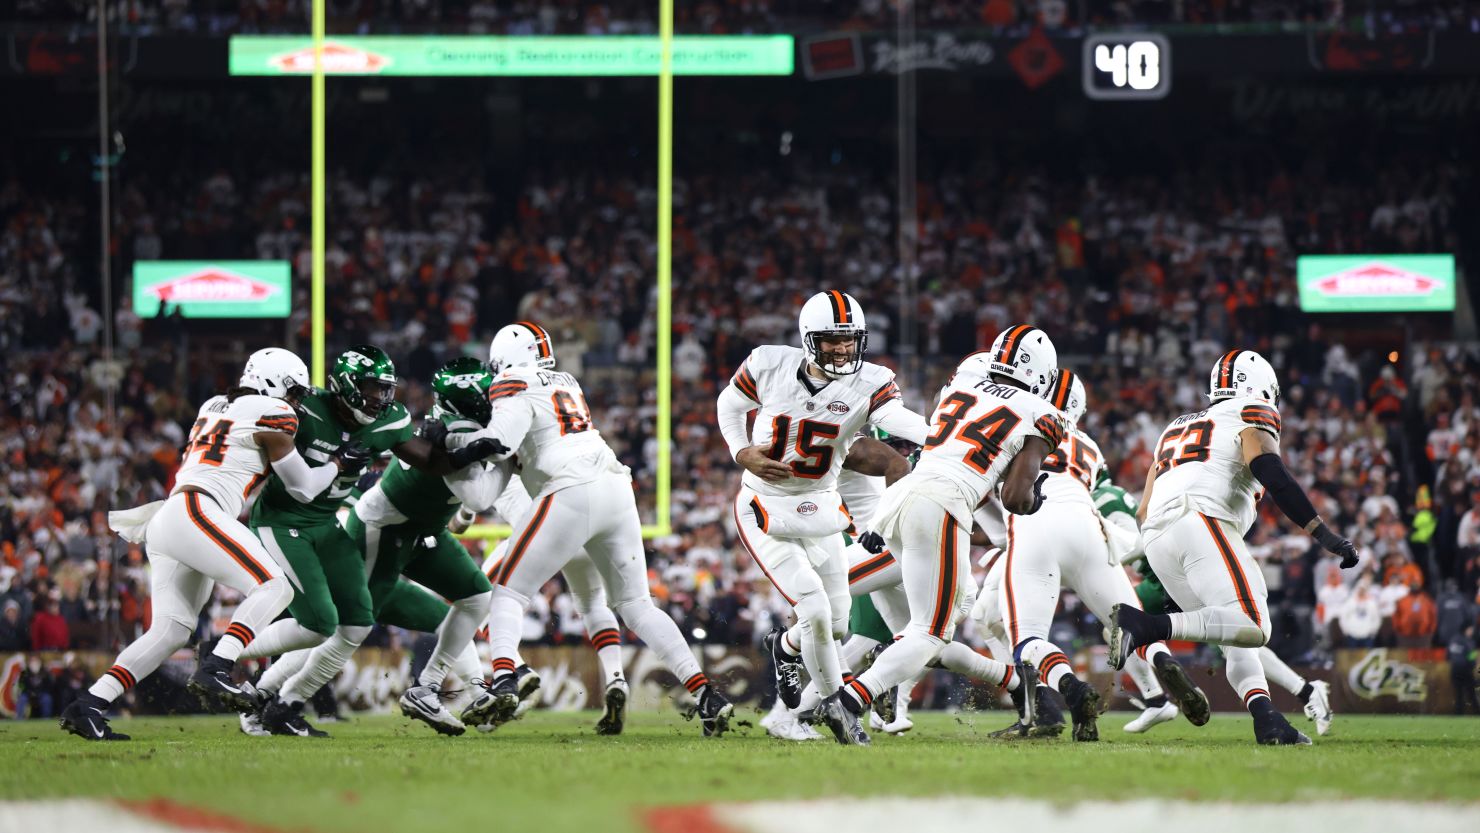 Cleveland Browns quarterback Joe Flacco (15) hands off to running back Jerome Ford (34) during the first half against the New York Jets at Cleveland Browns Stadium on Dec 28, 2023.